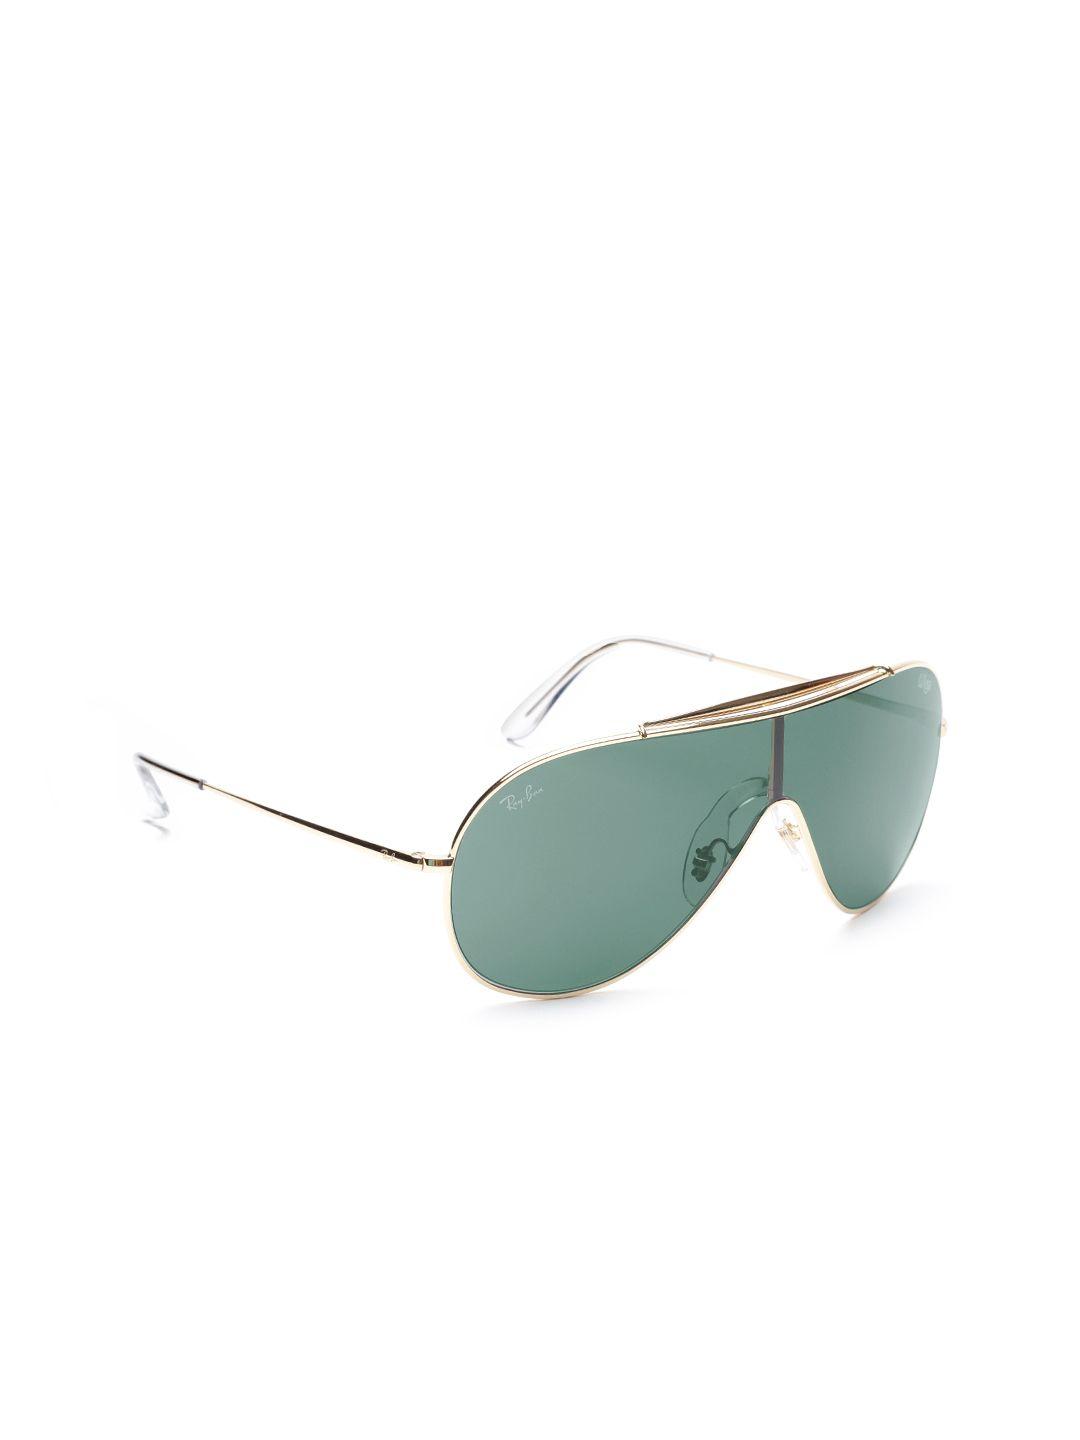 ray-ban unisex uv protected shield sunglasses 0rb359790507133